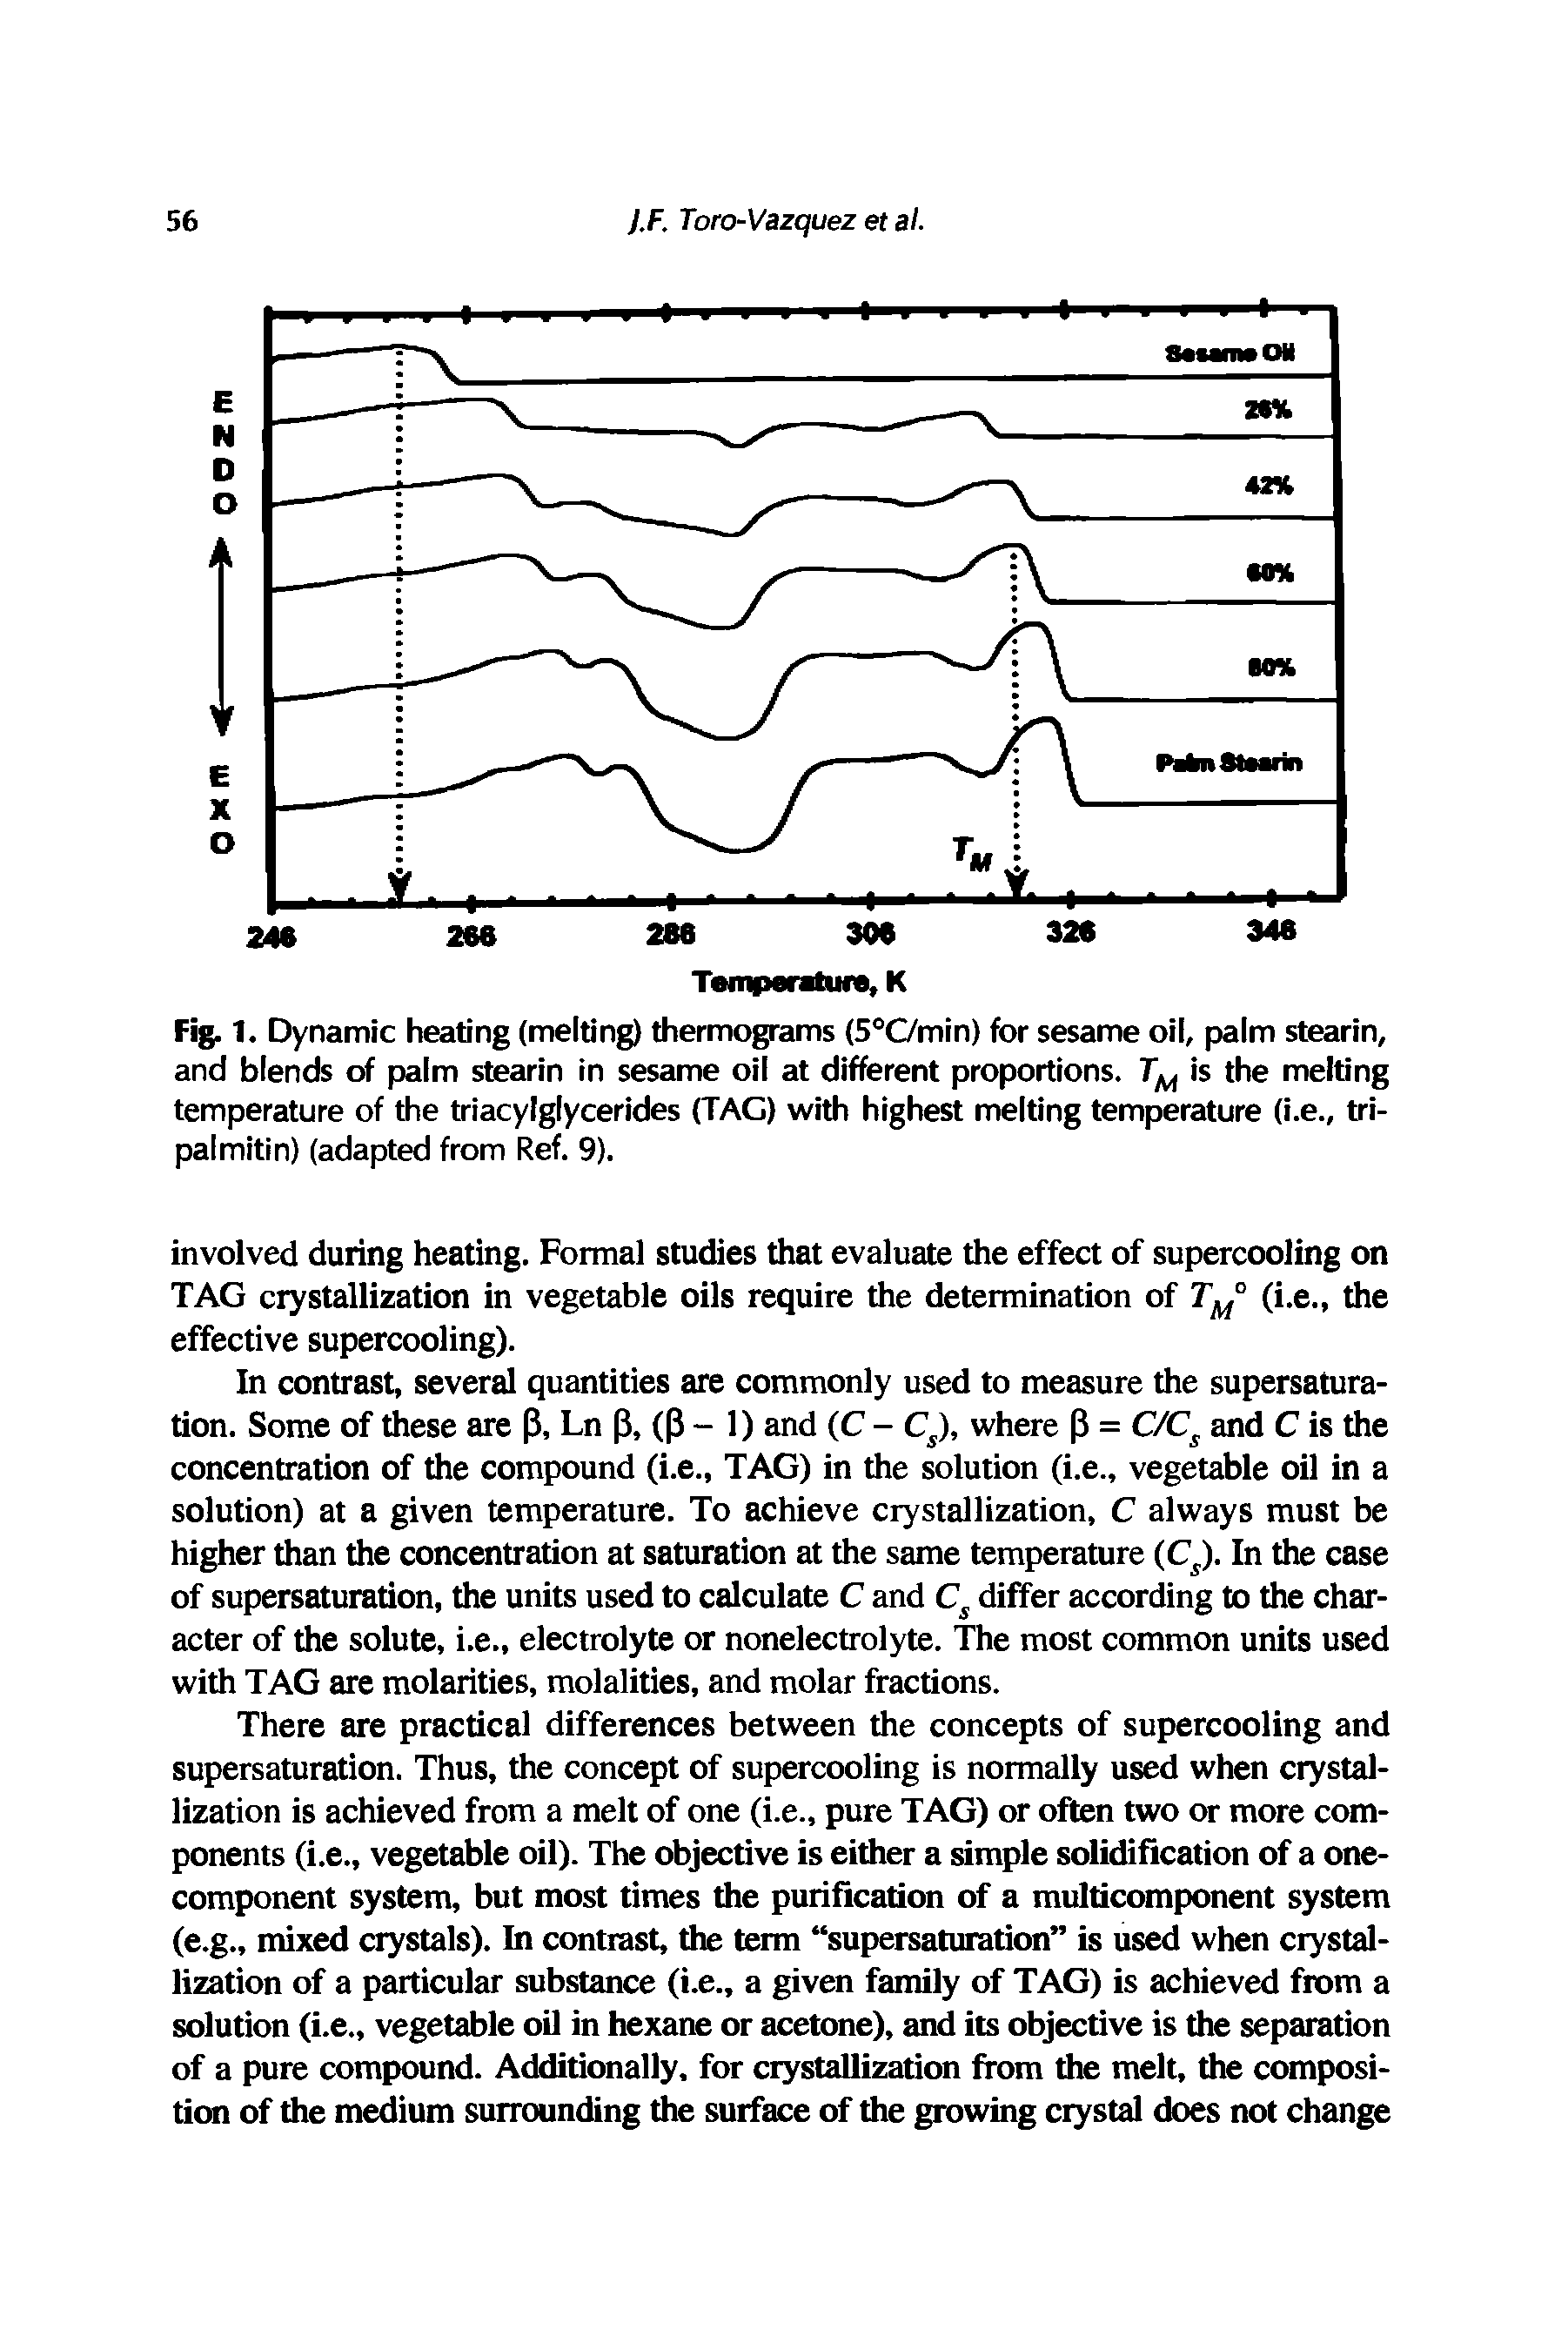 Fig. 1. Dynamic heating (melting) thermograms (5°C/min) for sesame oil, palm stearin, and blends of palm stearin in sesame oil at different proportions. Tm is the melting temperature of the triacylglycerides (TAG) with highest melting temperature (i.e., tri-pal mitin) (adapted from Ref. 9).